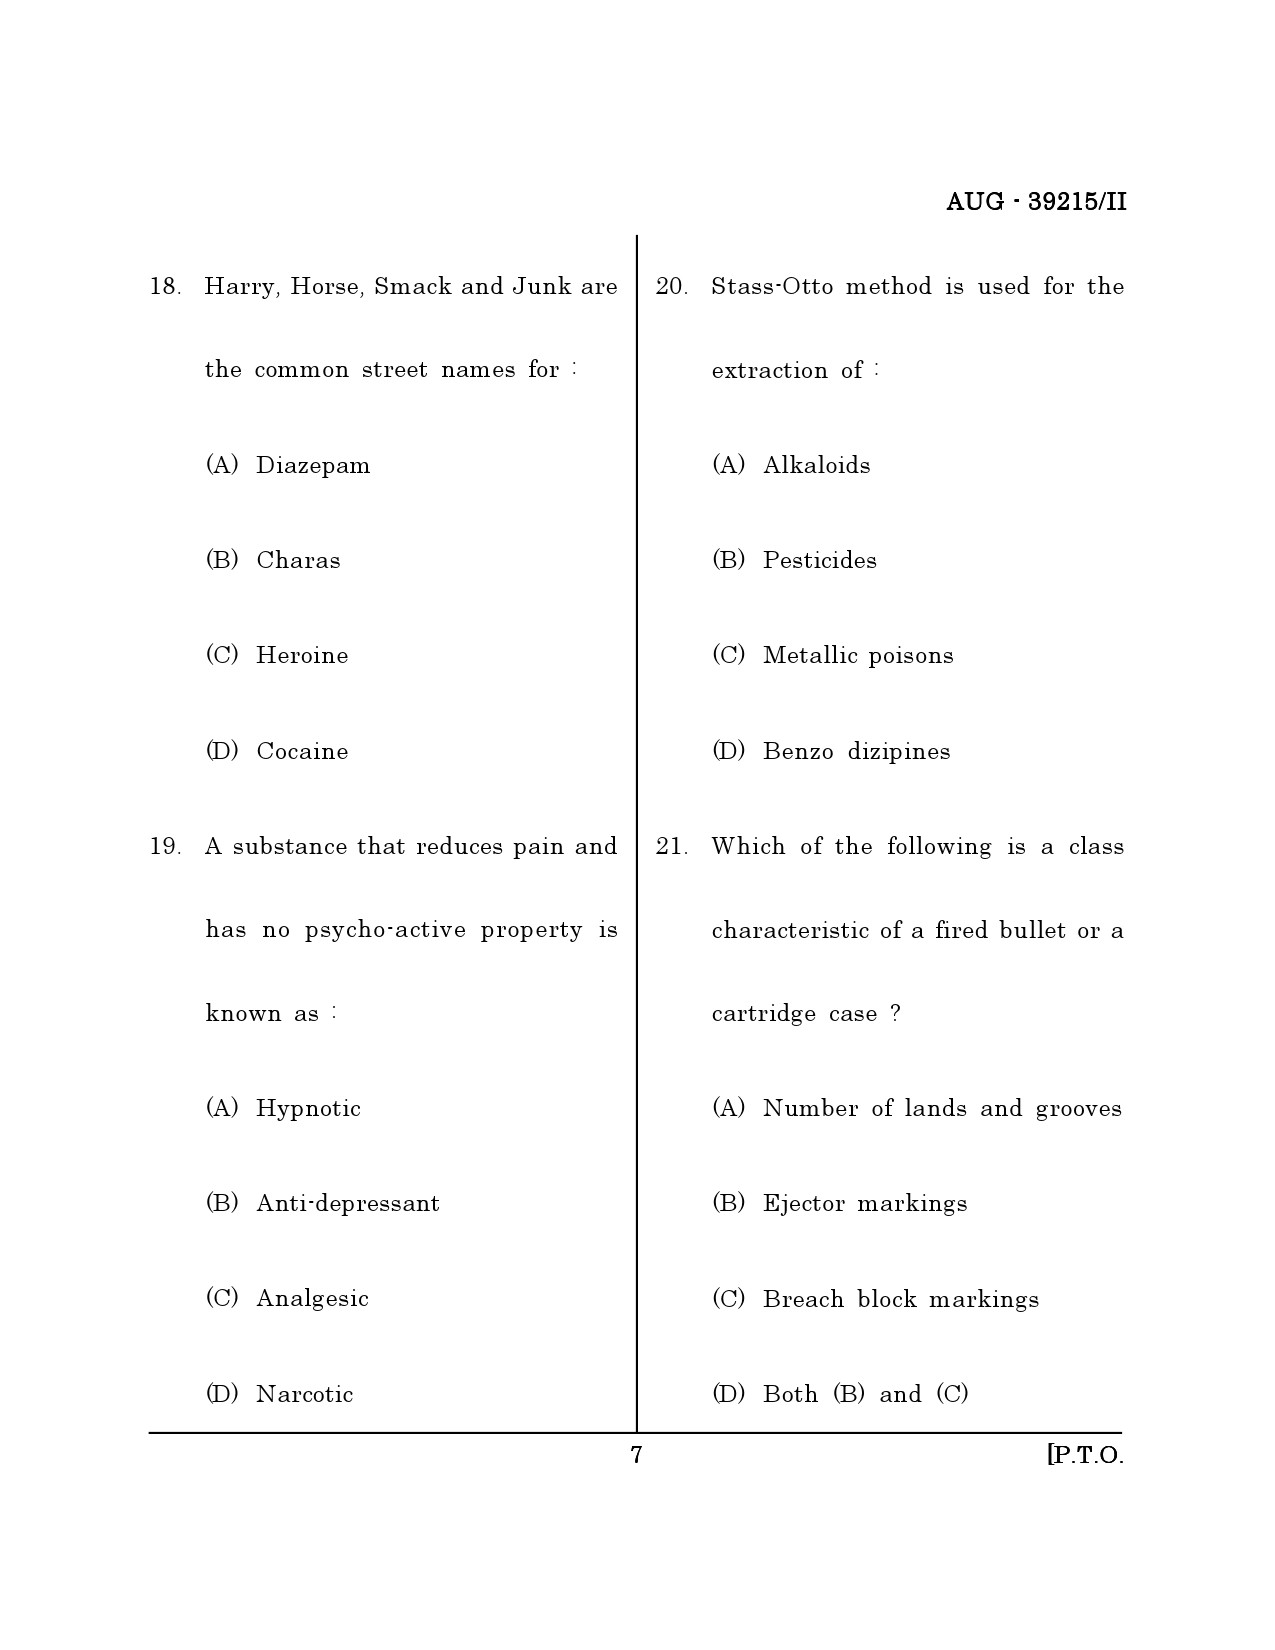 Maharashtra SET Forensic Science Question Paper II August 2015 6